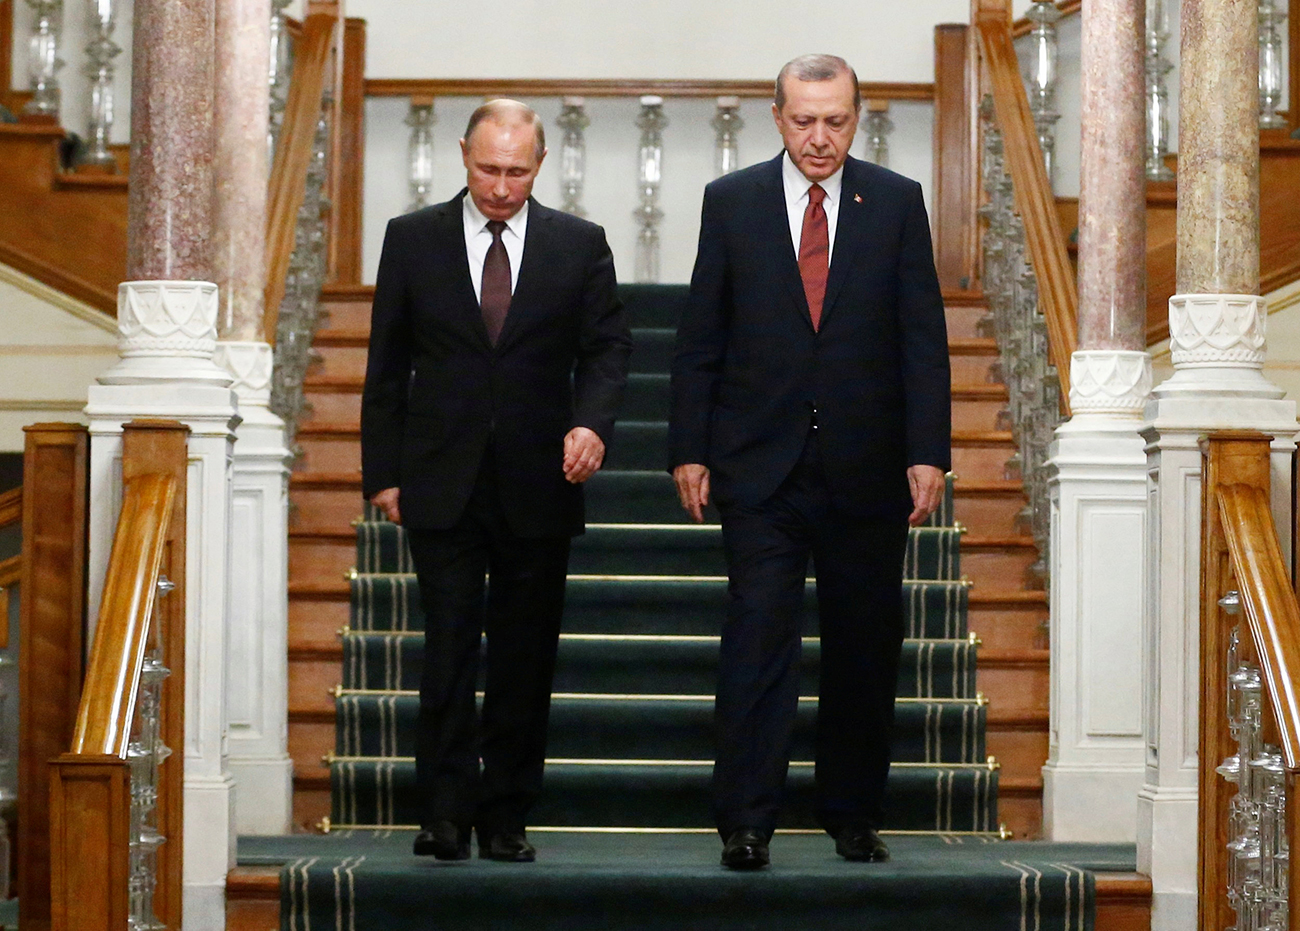 Russian and Turkish presidents Vladimir Putin and Tayyip Erdogan arrive for a news conference following their meeting in Istanbul, Oct. 10, 2016.